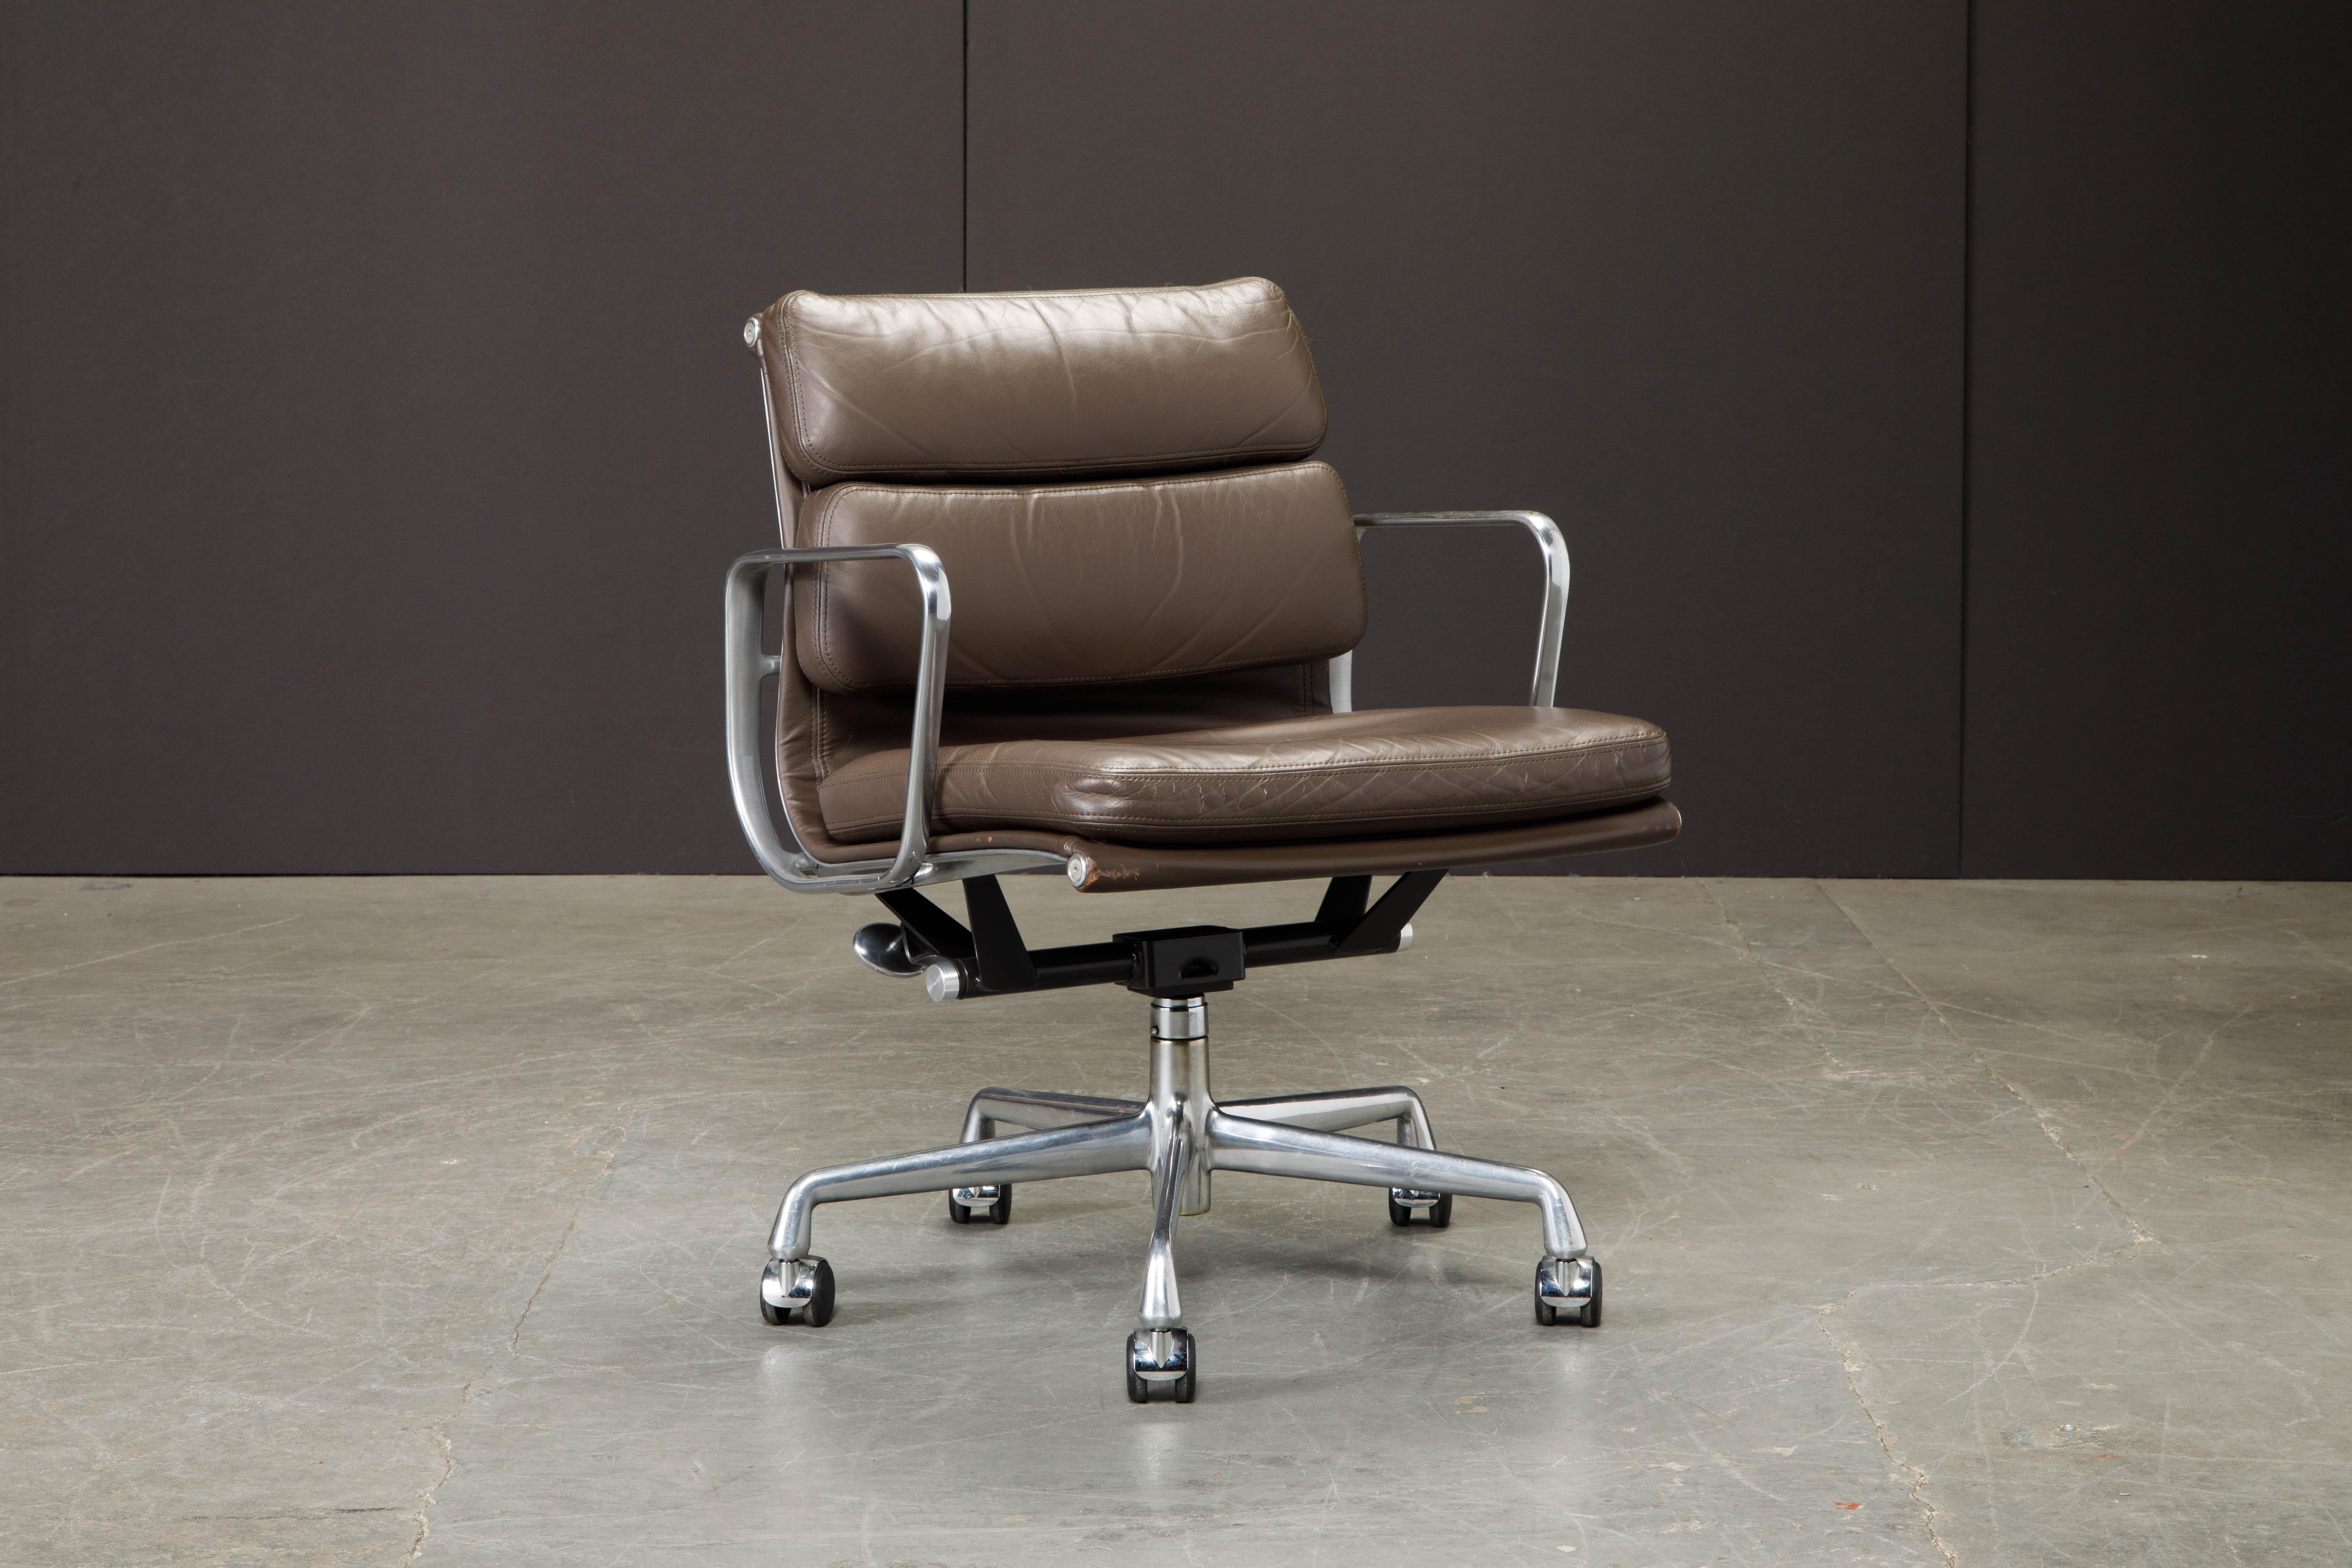 These sought after and in-demand leather desk chairs are the classic 'Soft Pad Management Chair' from the Aluminum Group line, designed by Charles and Ray Eames for Herman Miller. Featuring their original vintage brown leather upholstery over